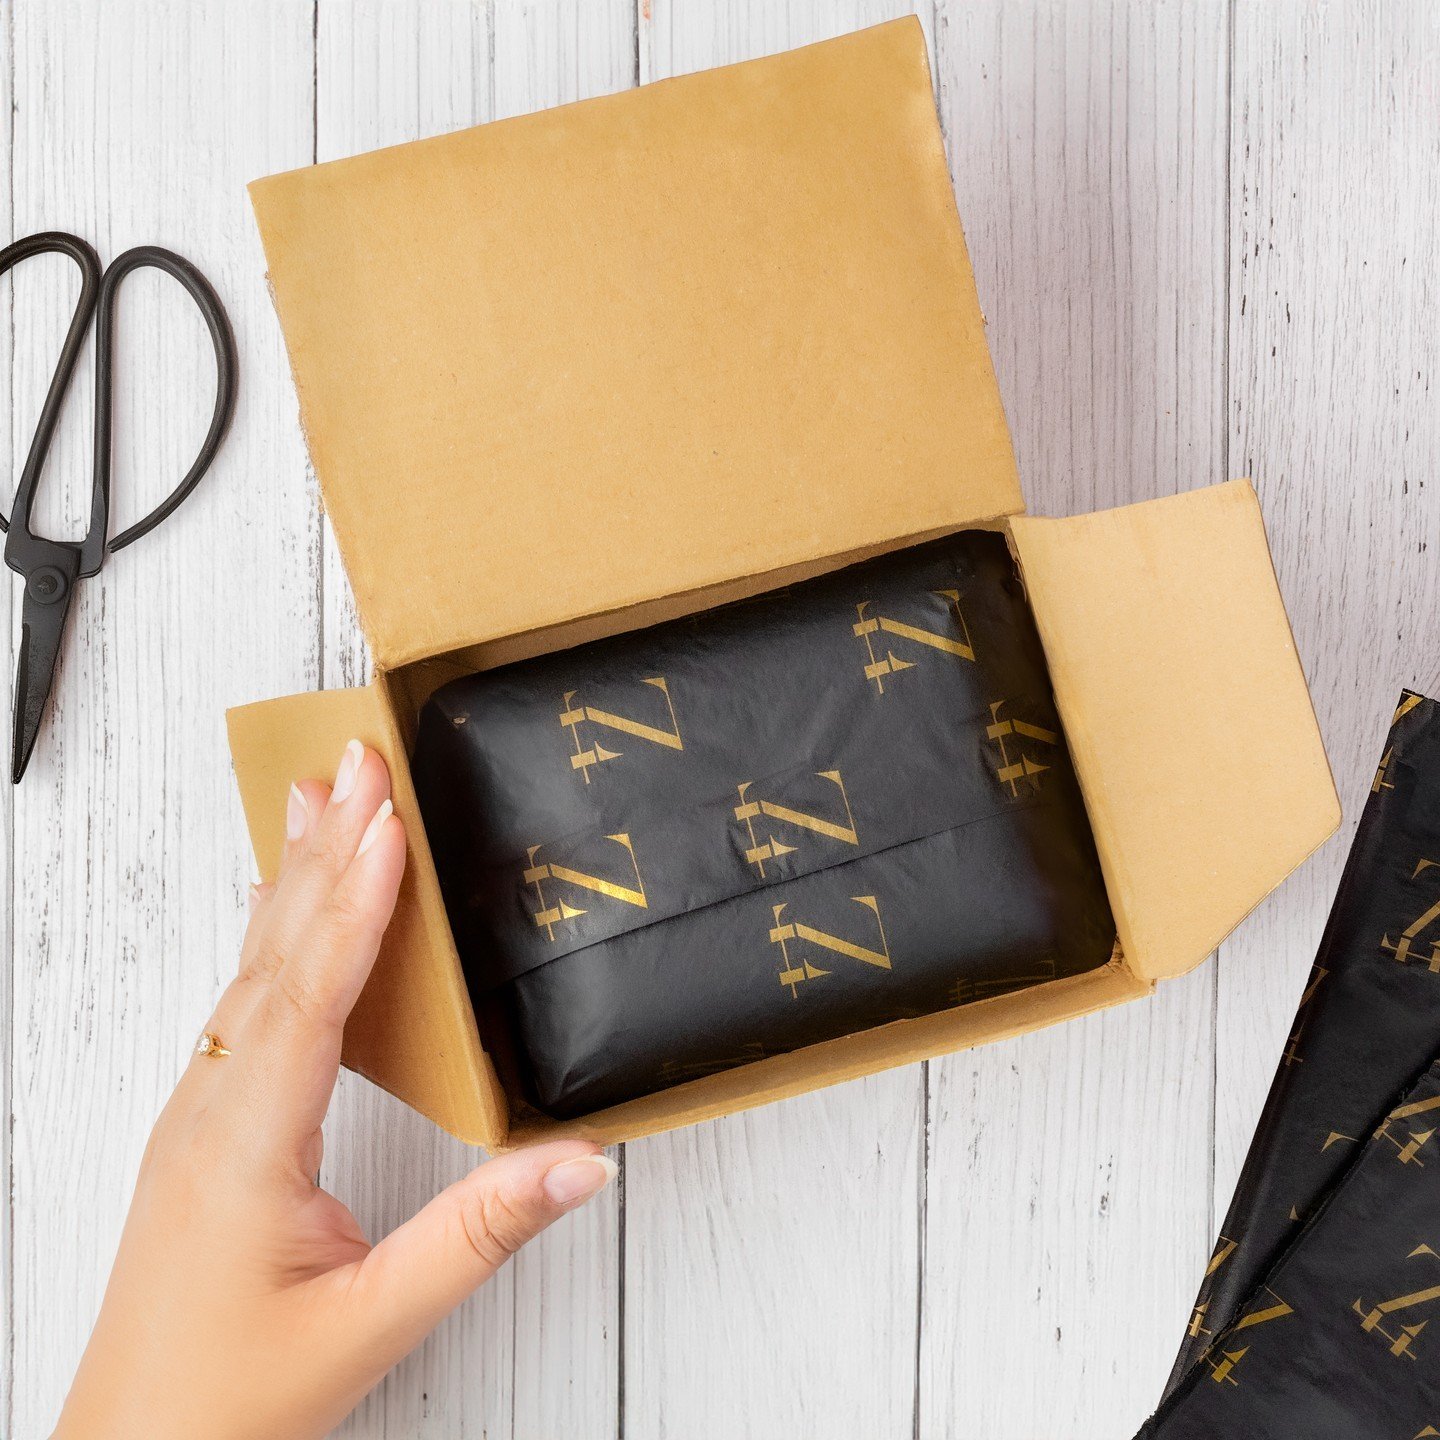 Custom tissue paper packaging: Make a 'wow' unboxing experience! Enhance your brand&rsquo;s  presence with impactful packaging for employee gifts, customer gifts and more. Explore customizable tissue paper packaging options to make every package uniq